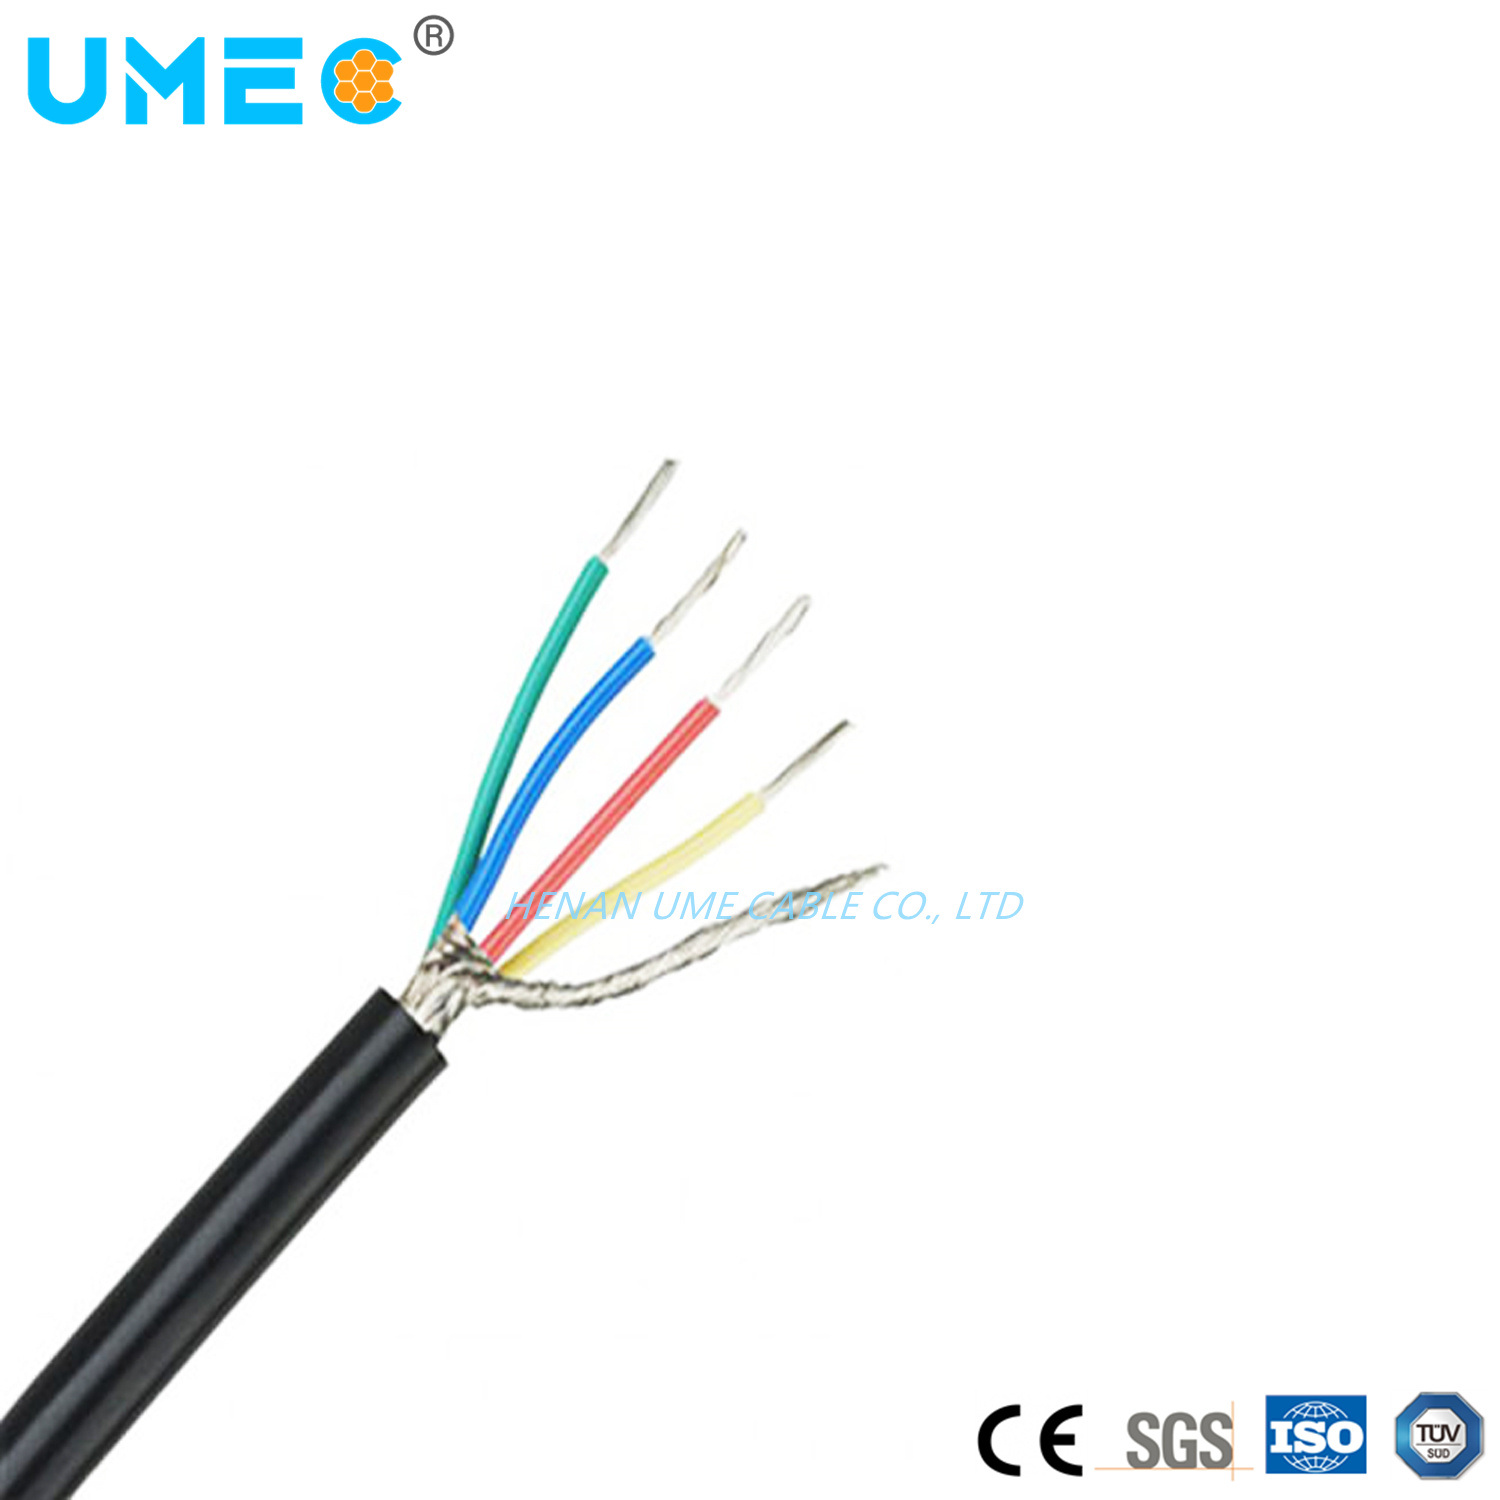 Network Computer Instrument Cable Wire Yellow/Green Black 3 4 5 6core Special Thermoplastic Sheath Cable Wire